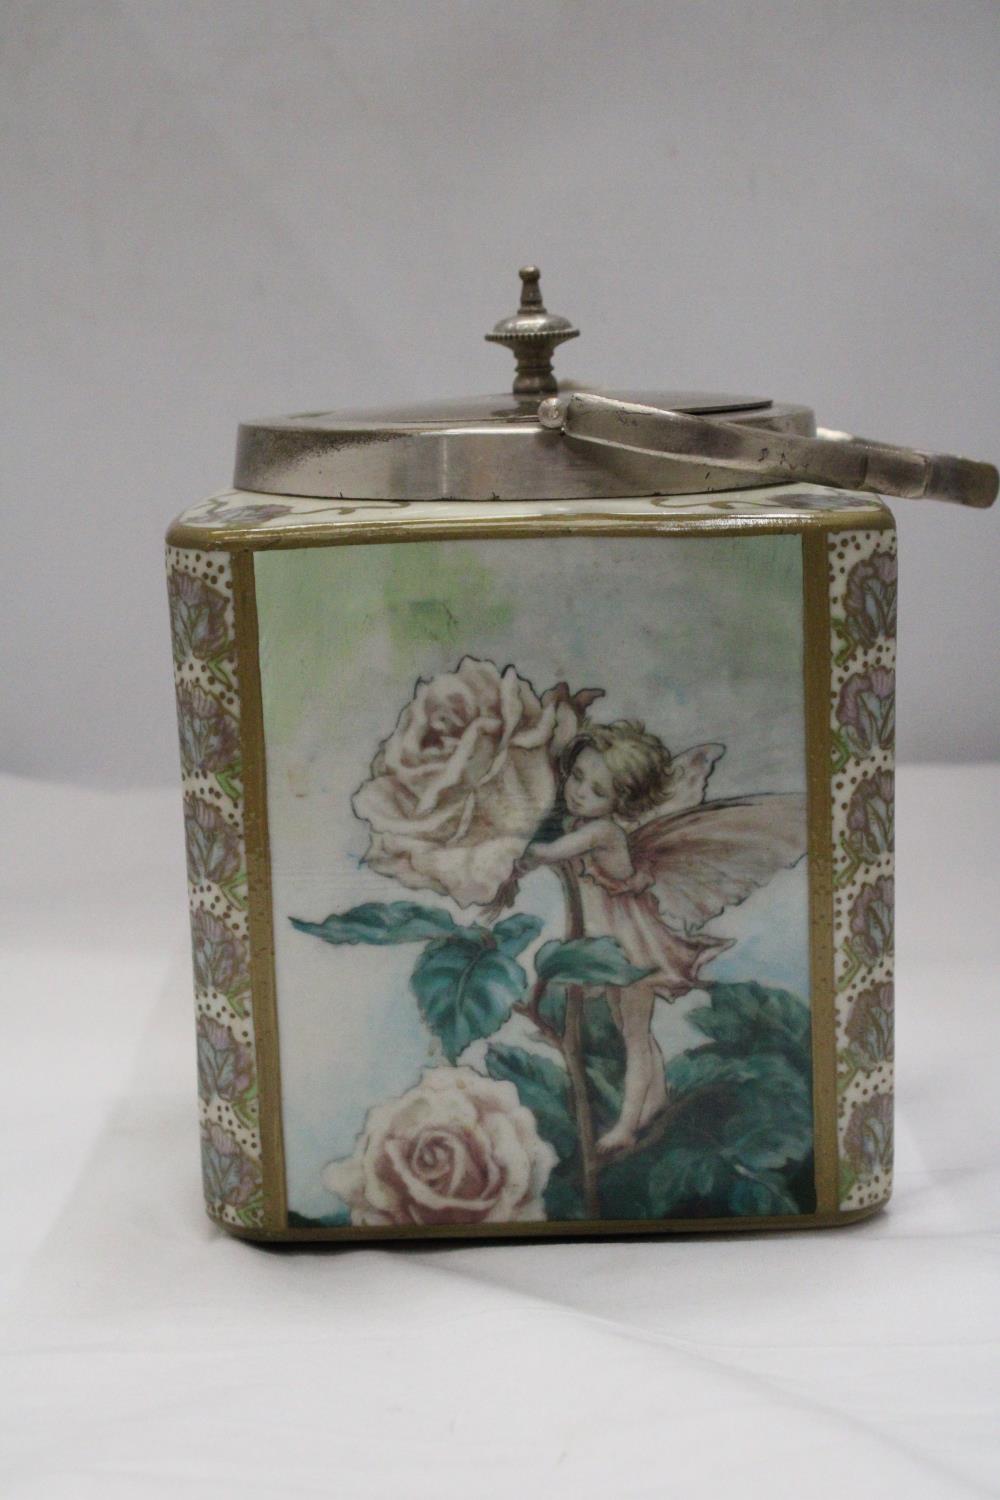 A CERAMIC BISCUIT BARREL DEPICTING FLOWER FAIRIES BY CICELY MARY BARKER - 12 x 6 x 6 INCH - Image 3 of 6